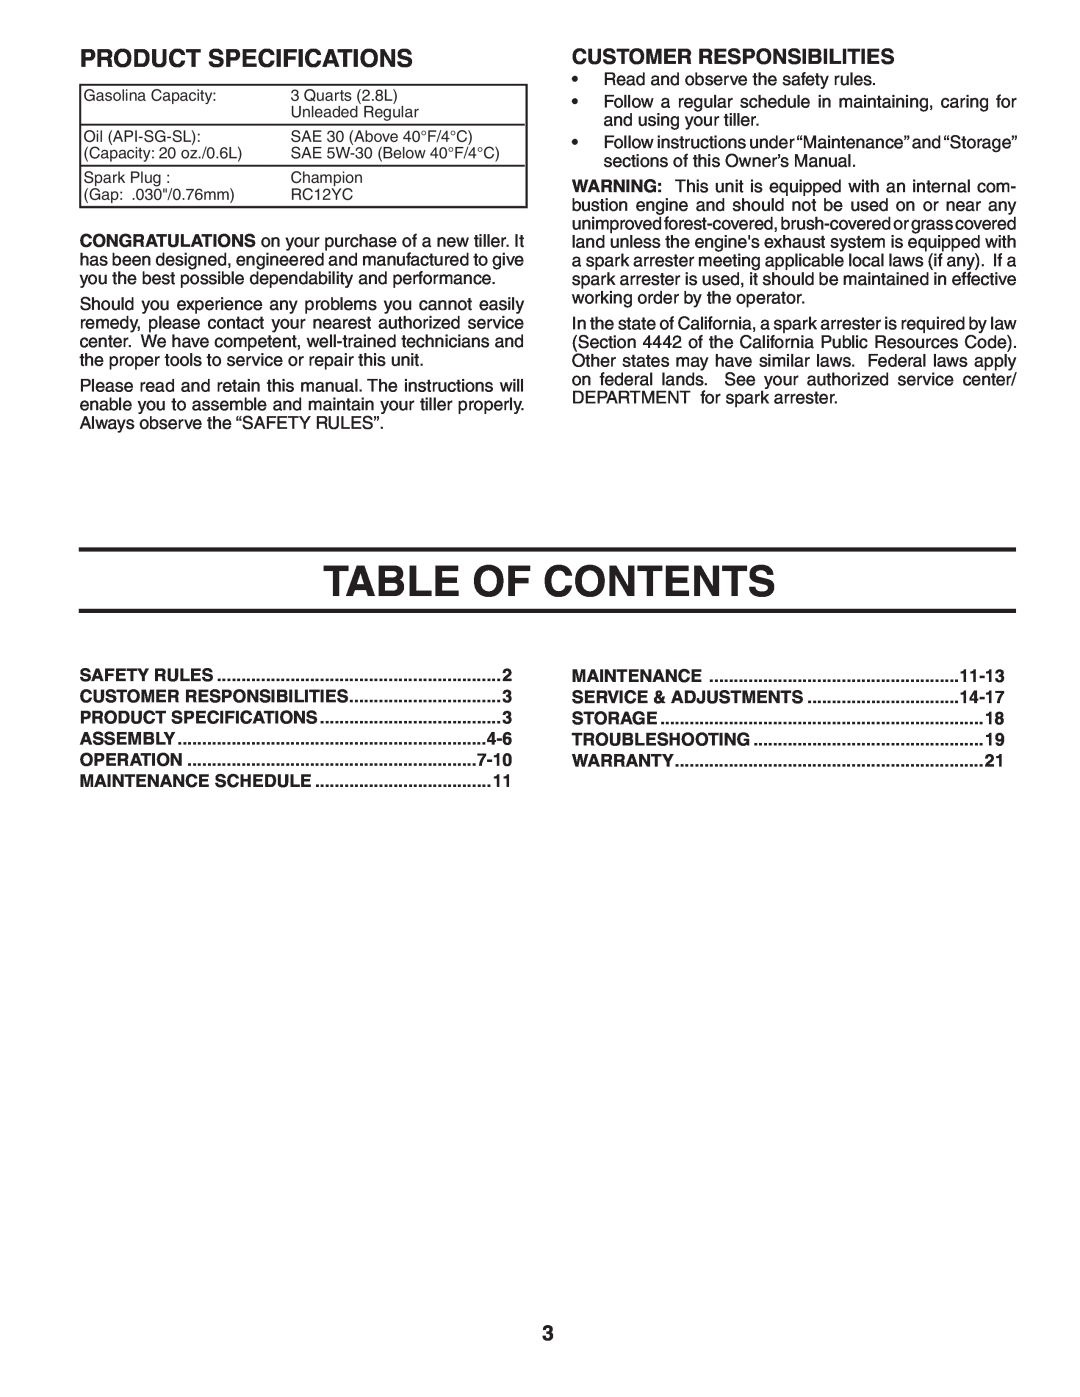 Poulan 96092000400 manual Table Of Contents, Product Specifications, Customer Responsibilities, 11-13, 14-17, 7-10 